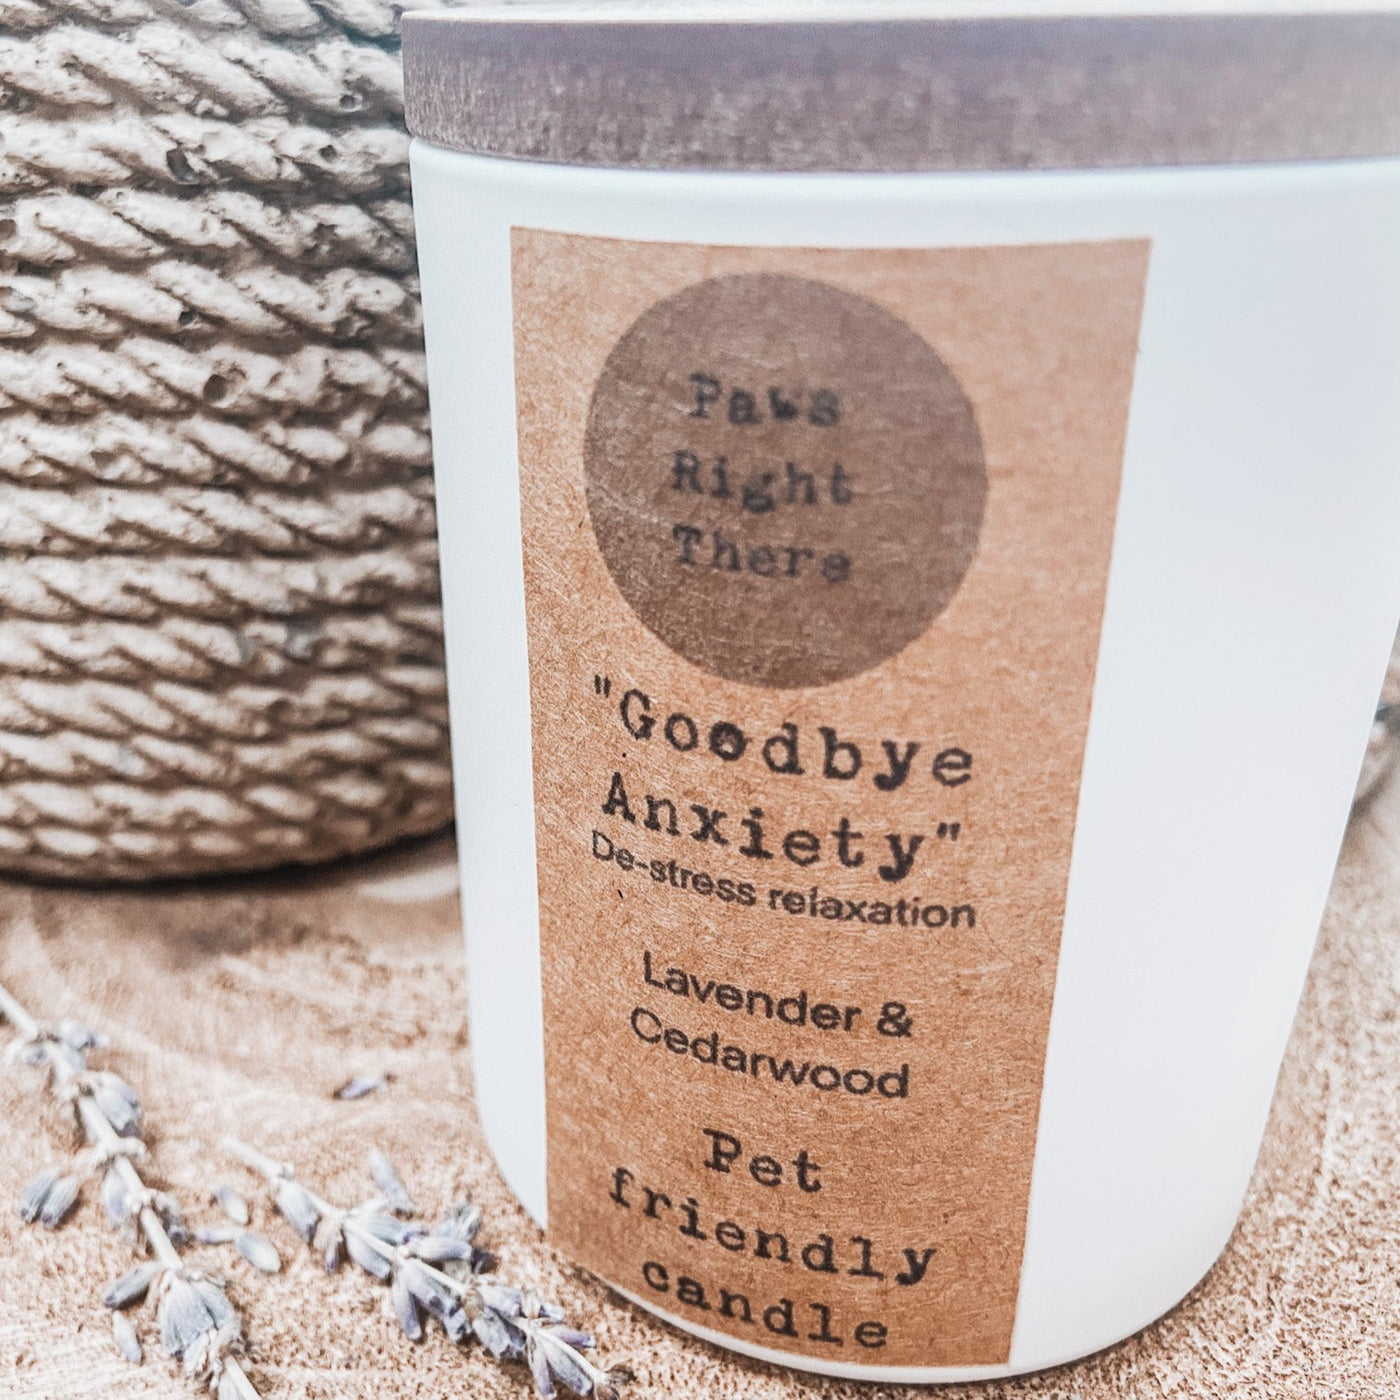 Goodbye Anxiety - Pet Friendly Candle for de-stress relaxation